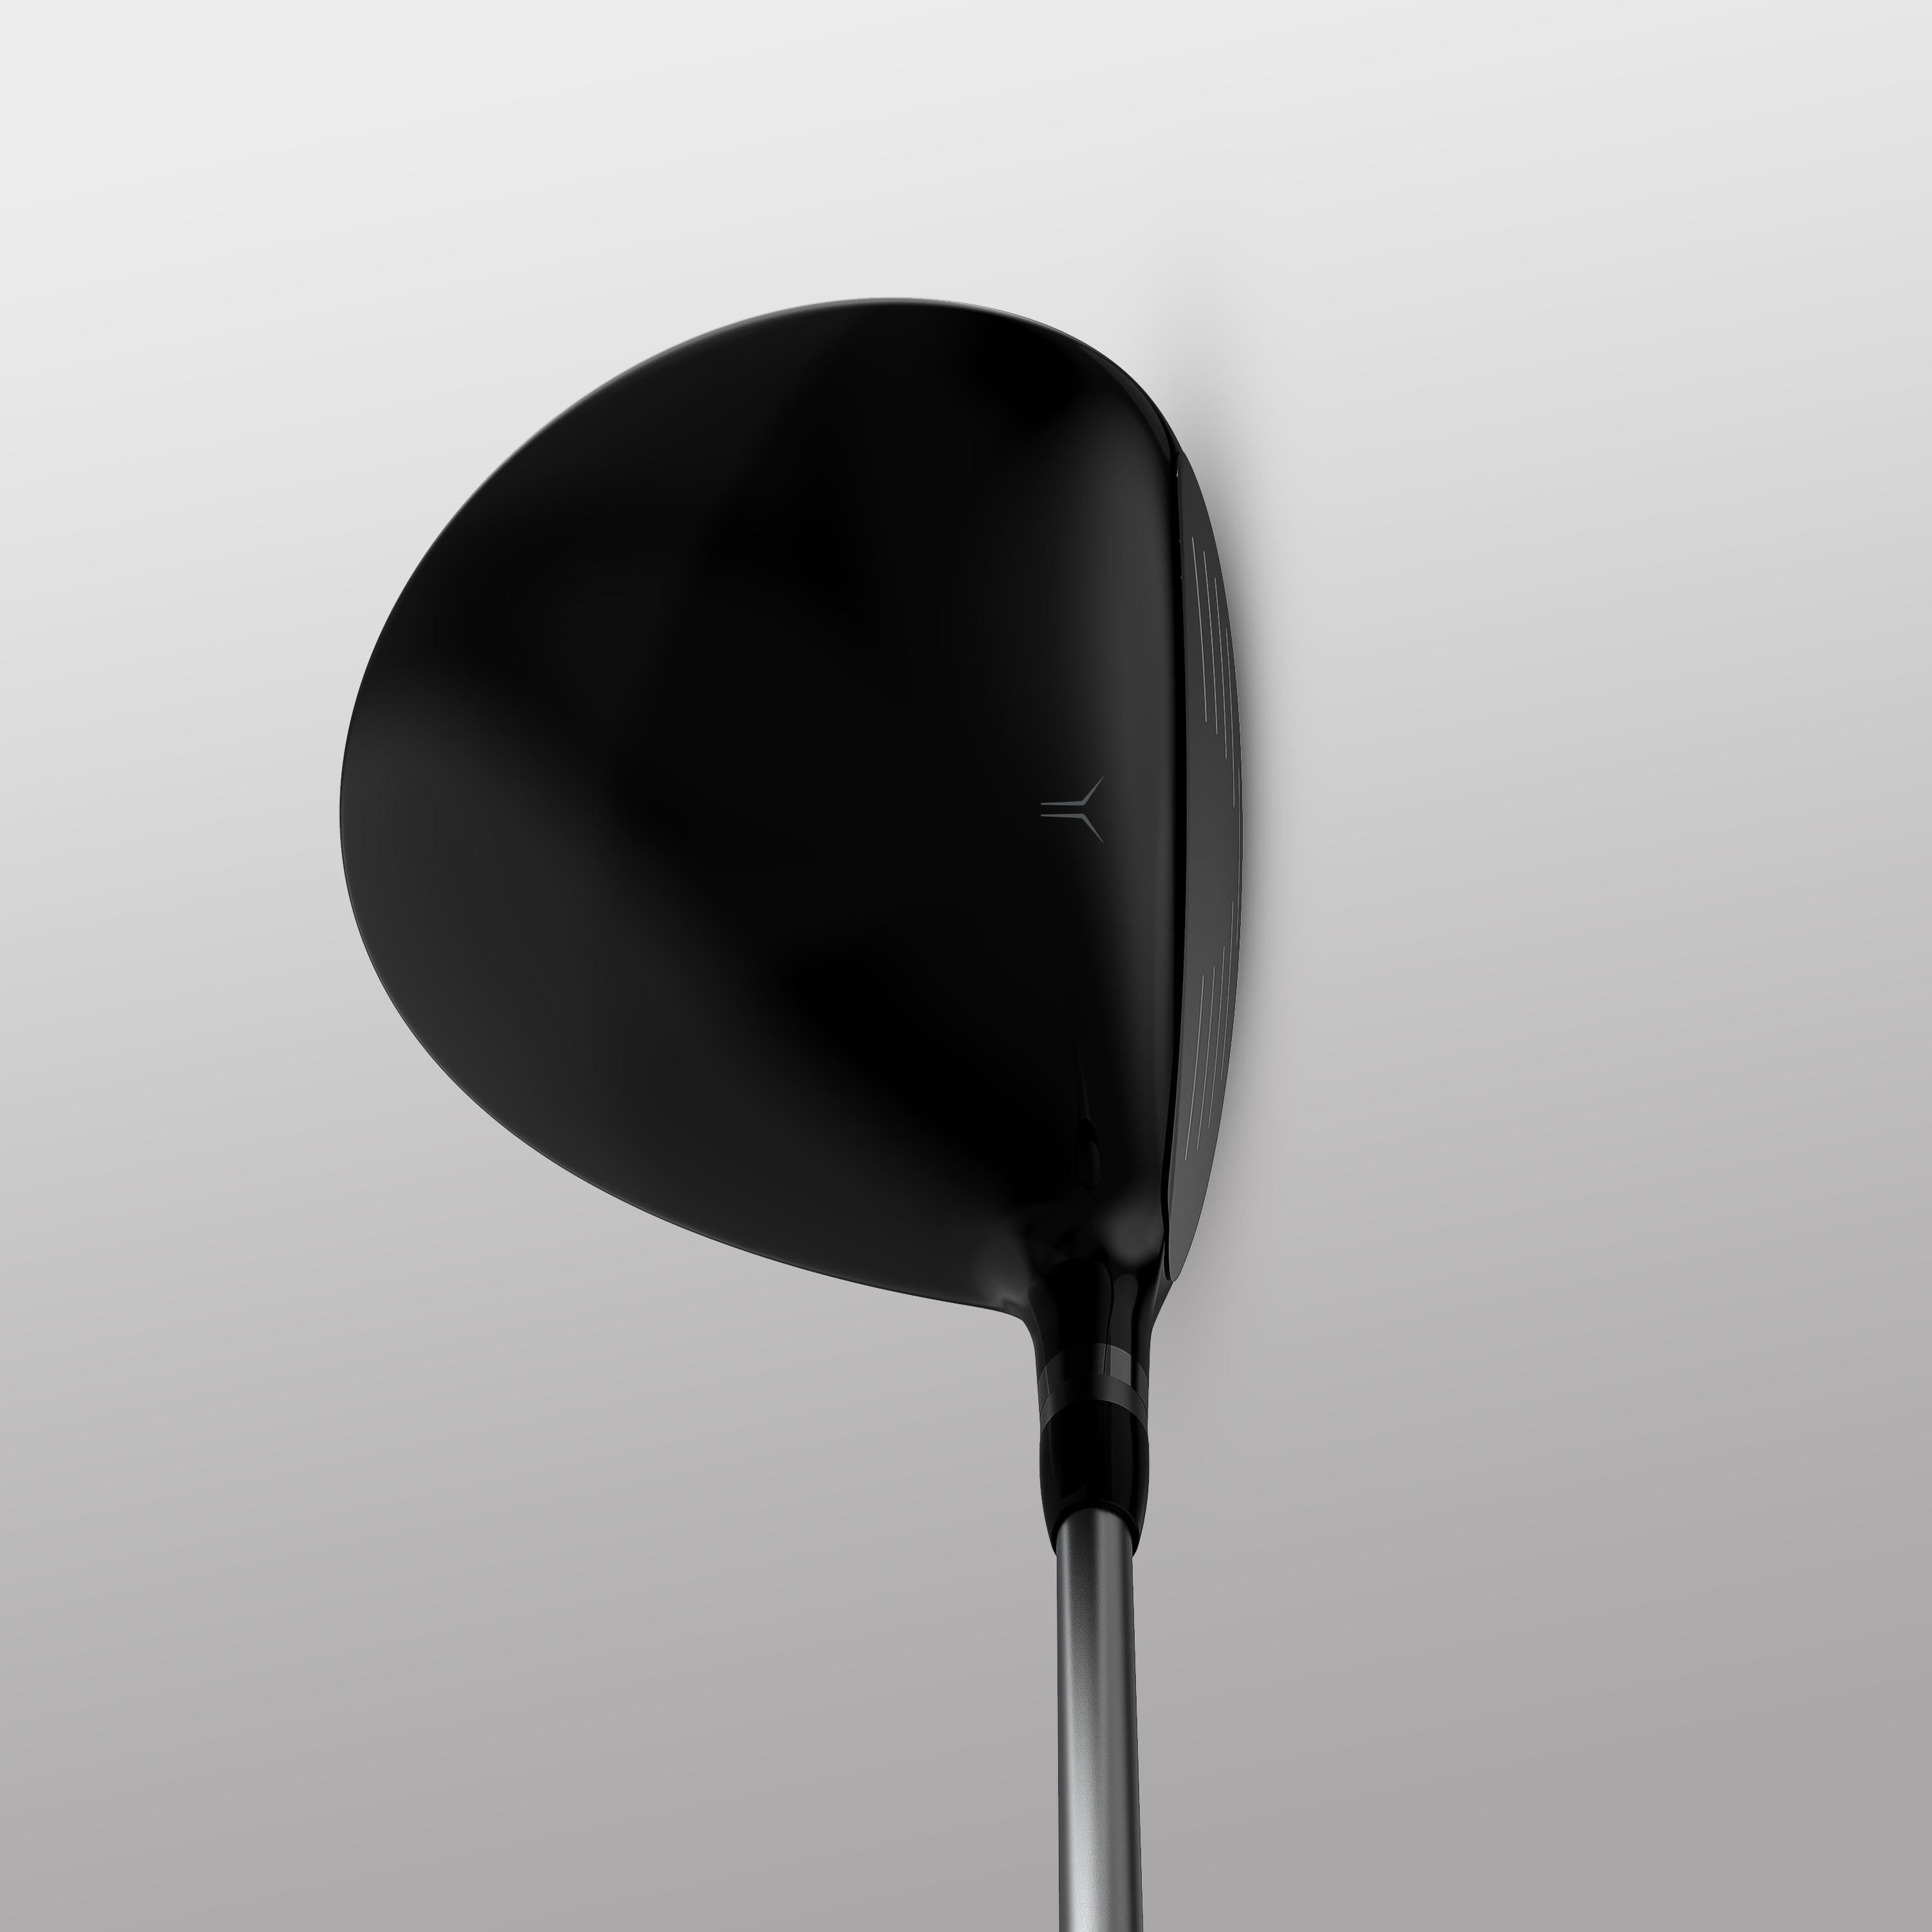 GOLF DRIVER 500 LEFT HANDED SIZE 2 & LOW SPEED 2/8